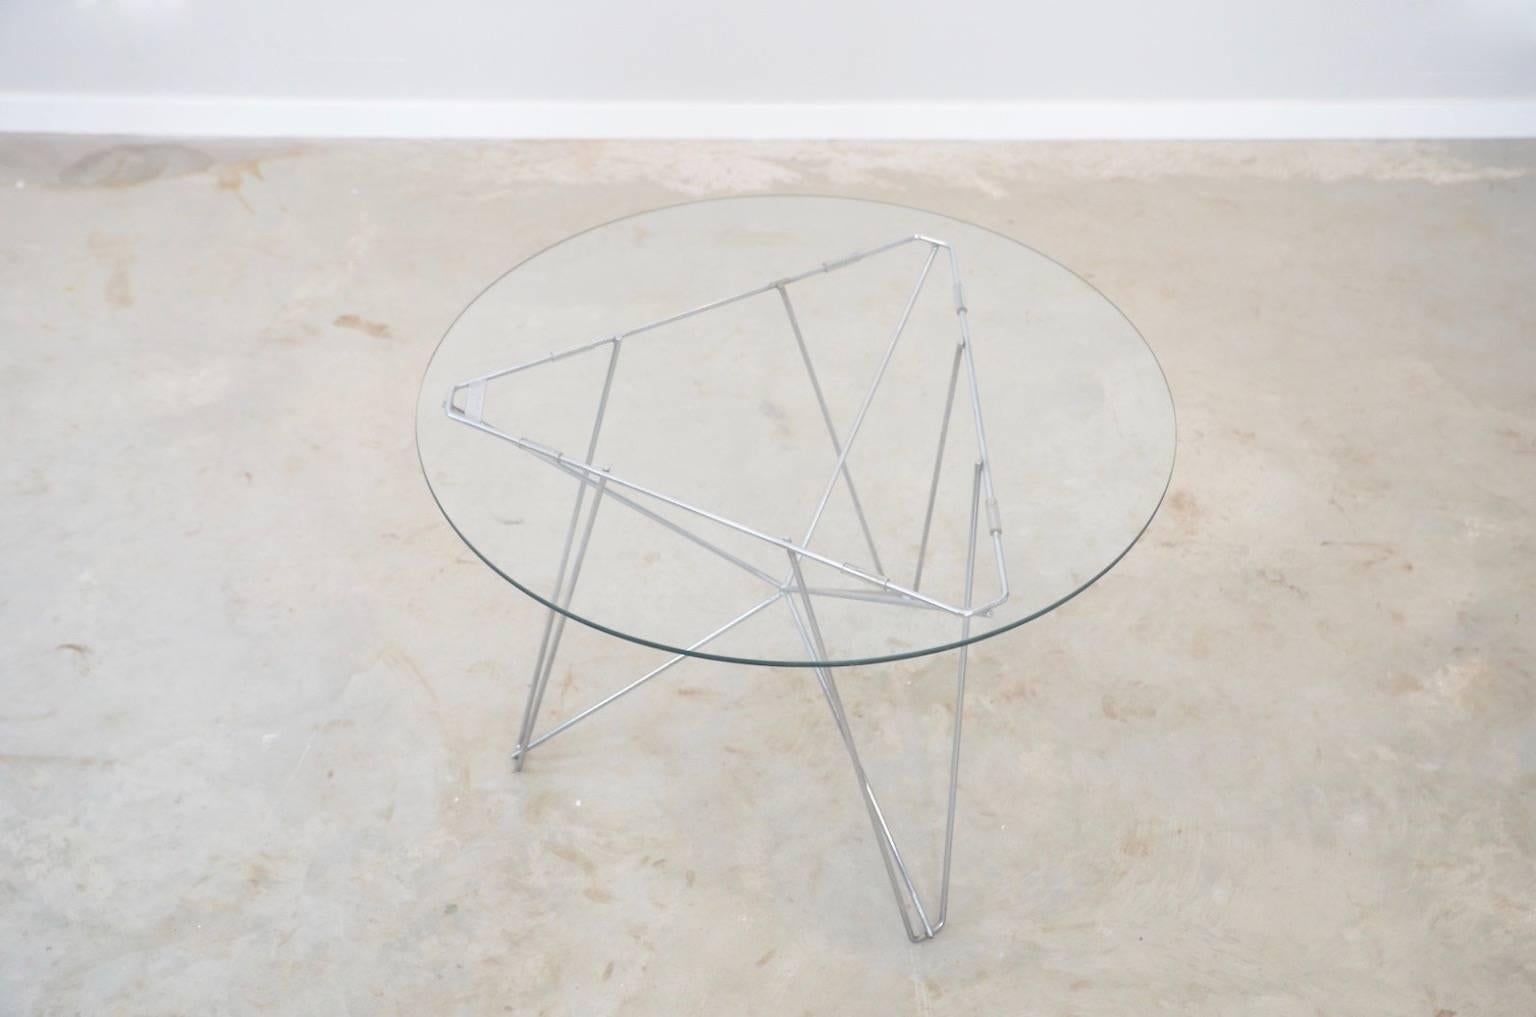 Mid-Century Modern IJhorst Coffee Table by Cobra Co-Founder Constant Nieuwenhuys for 't Spectrum